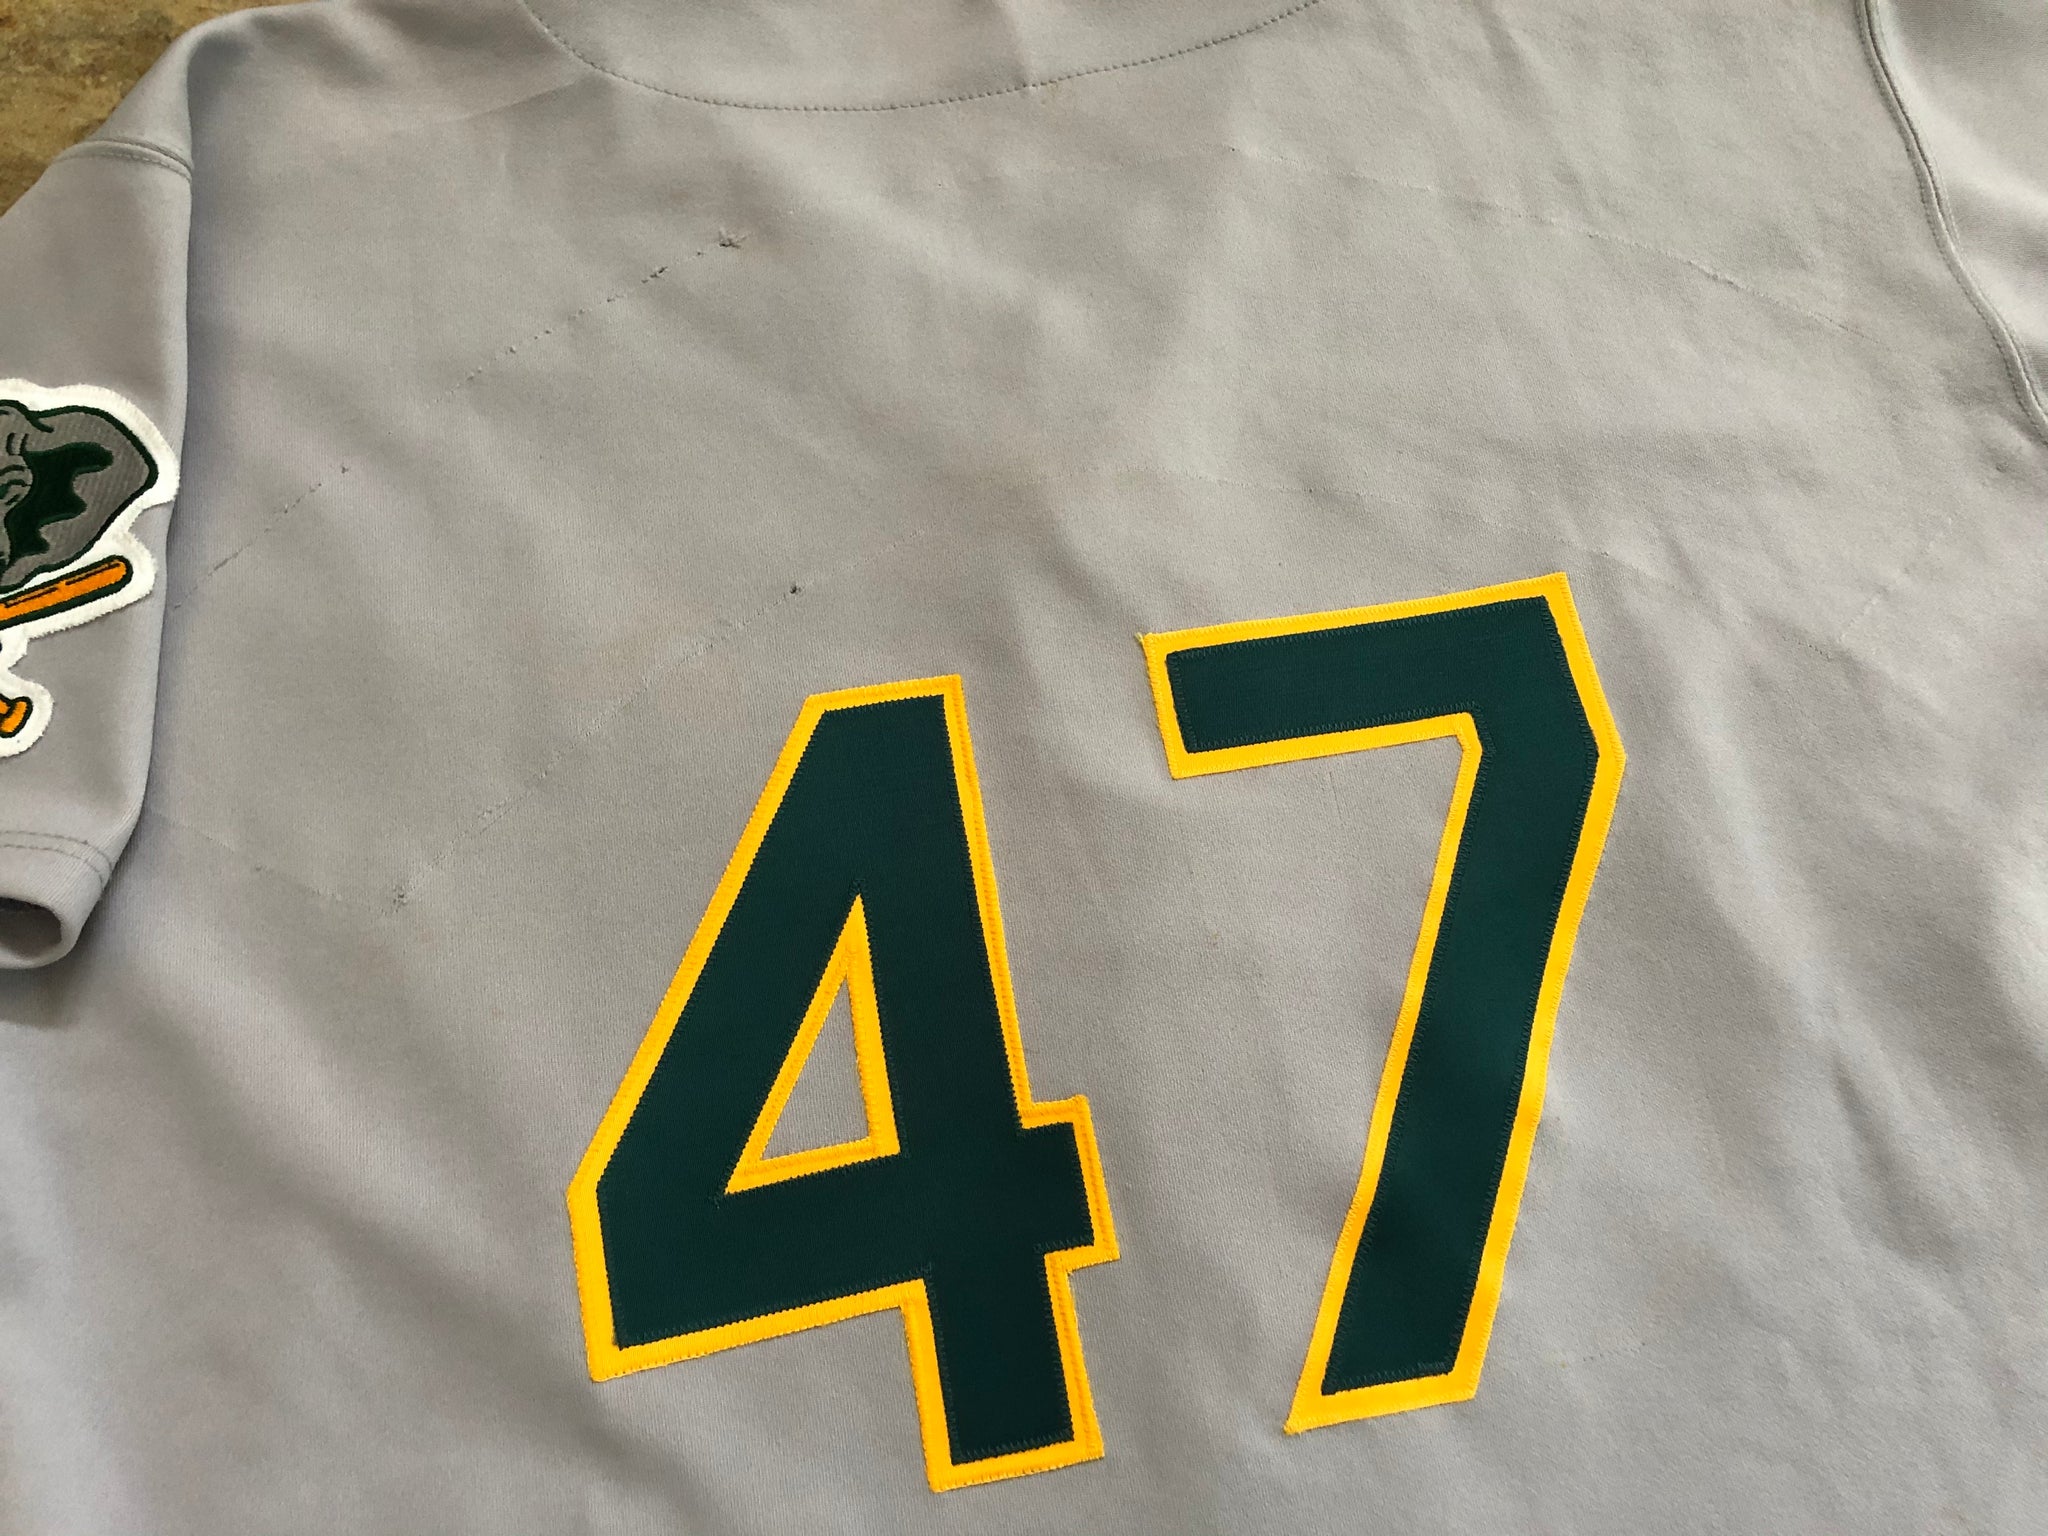 Oakland Athletics Blank Game Issued Yellow Jersey 46 DP48512